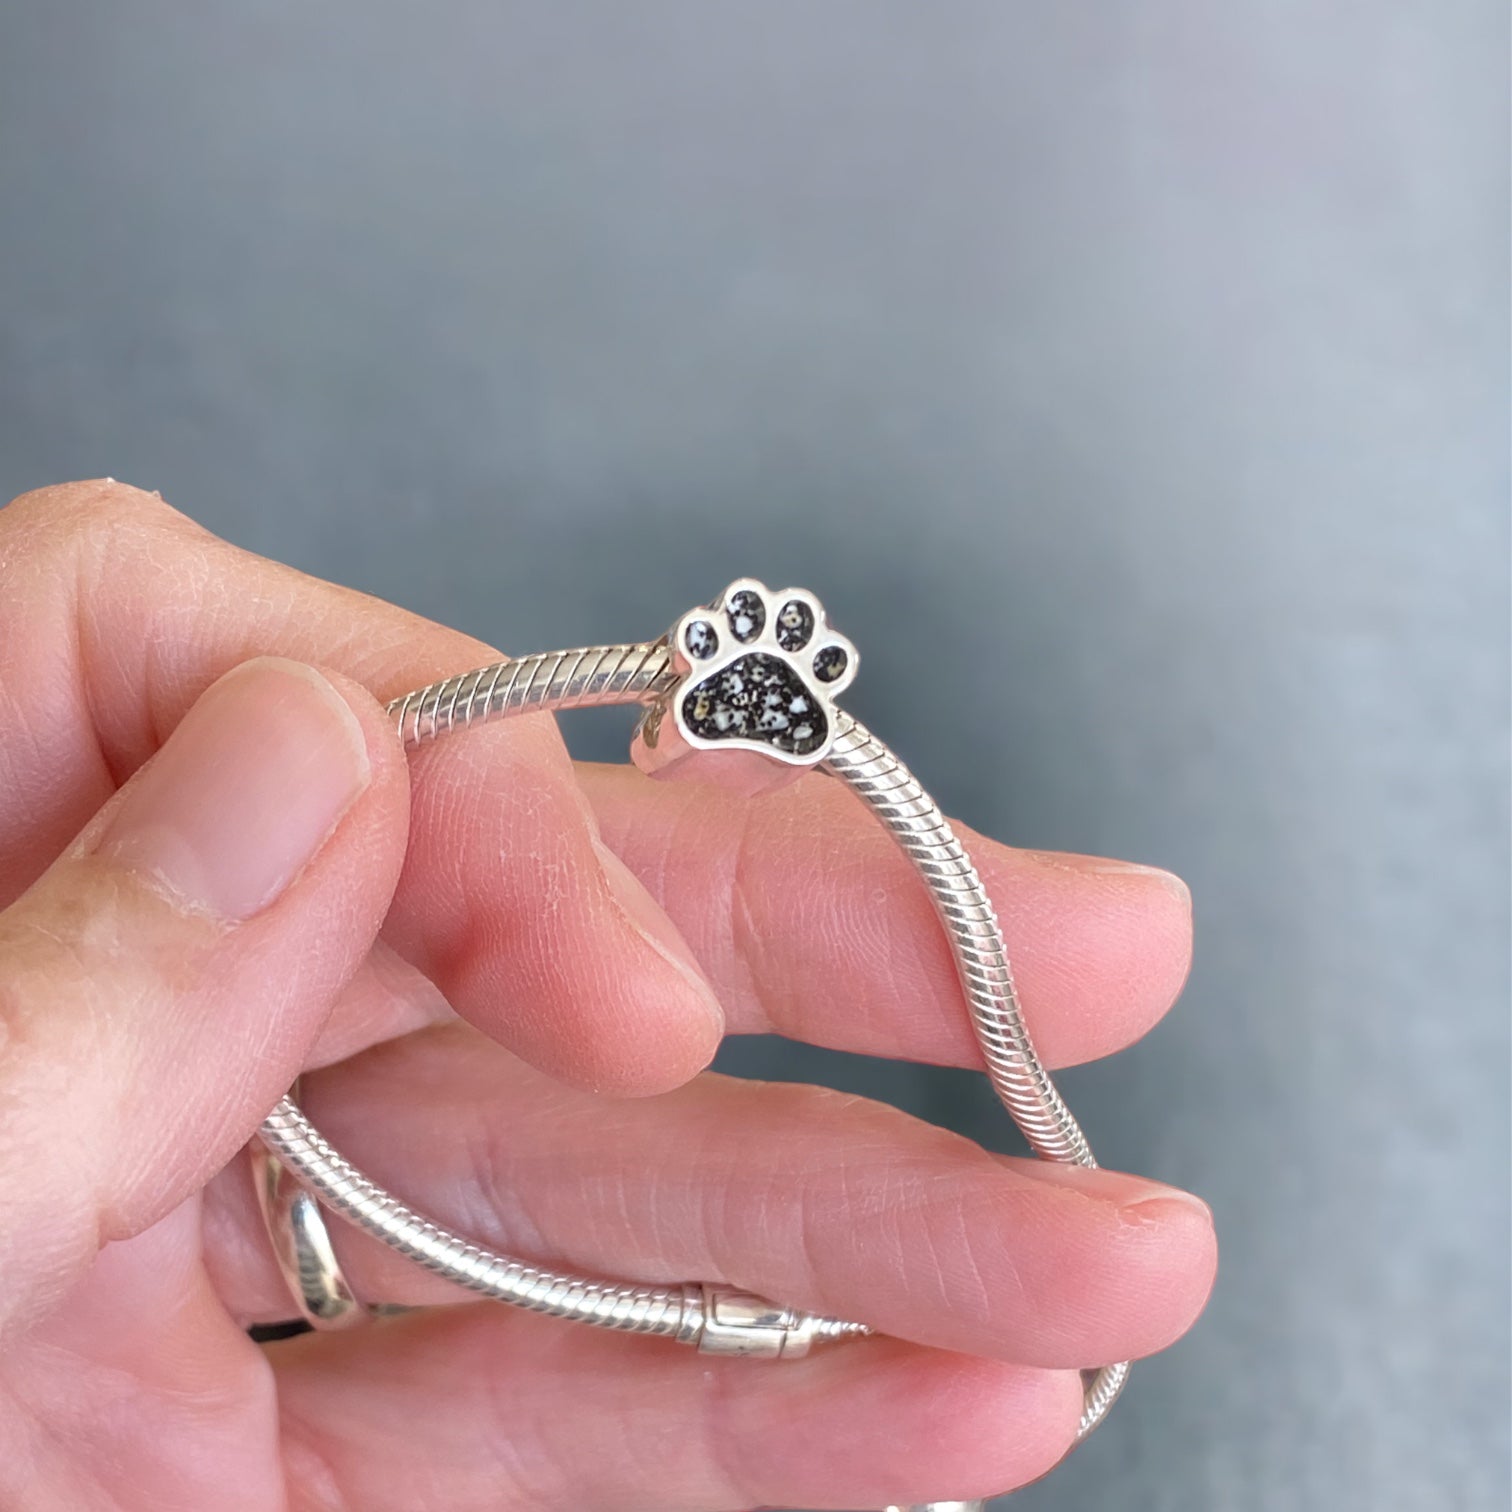 Silver Ashes Charm 'Baby feet' for Pandora bracelets